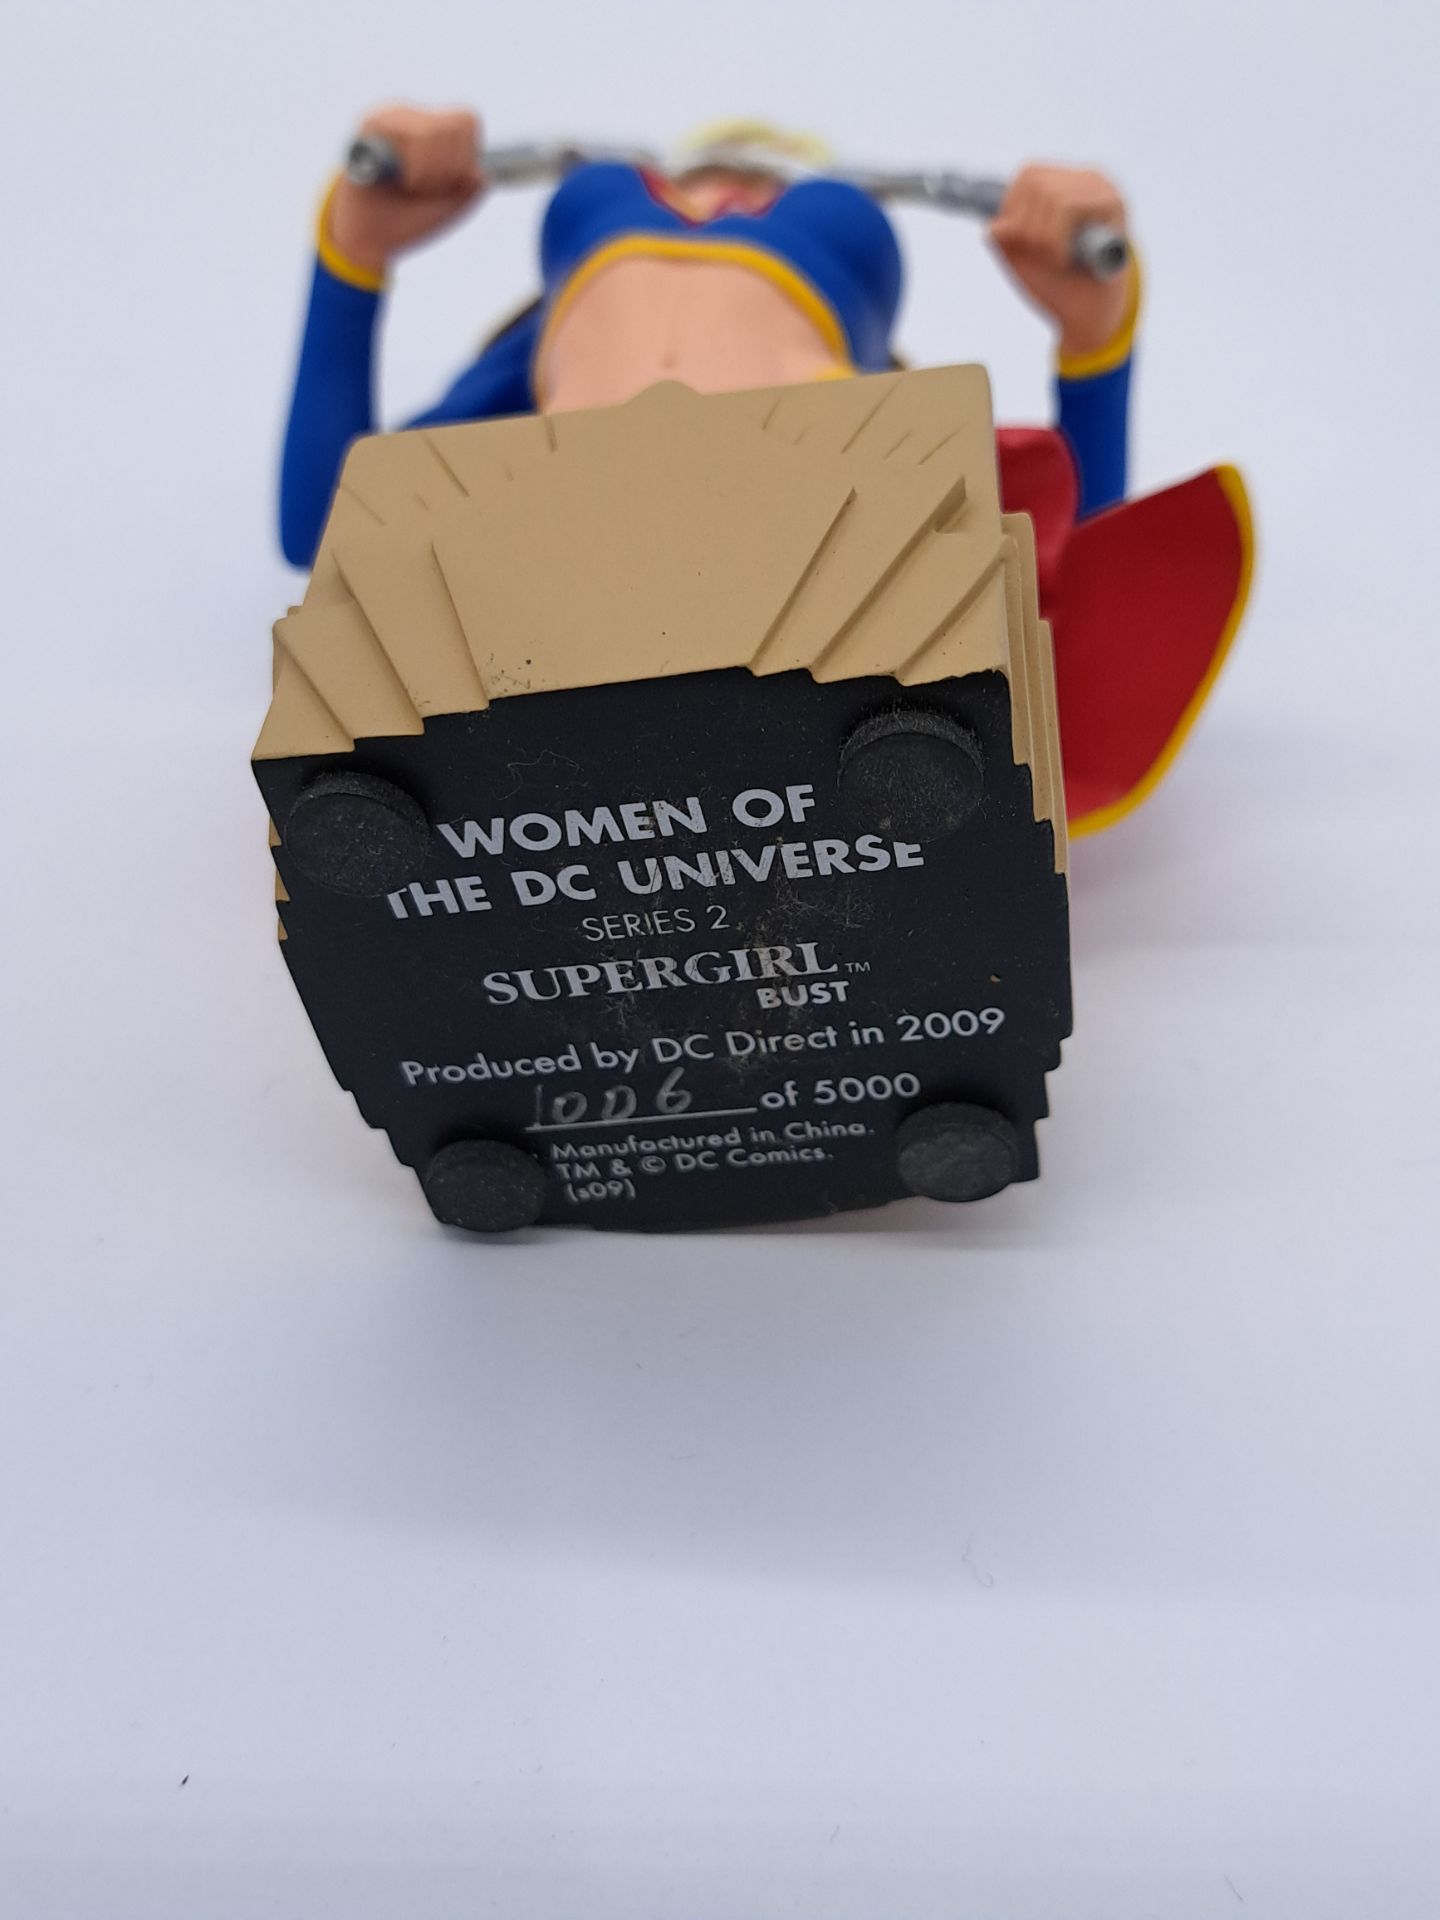 Women of the DC Universe Series 2 Supergirl Bust 1006 of 5000 by DC Direct - Image 3 of 3